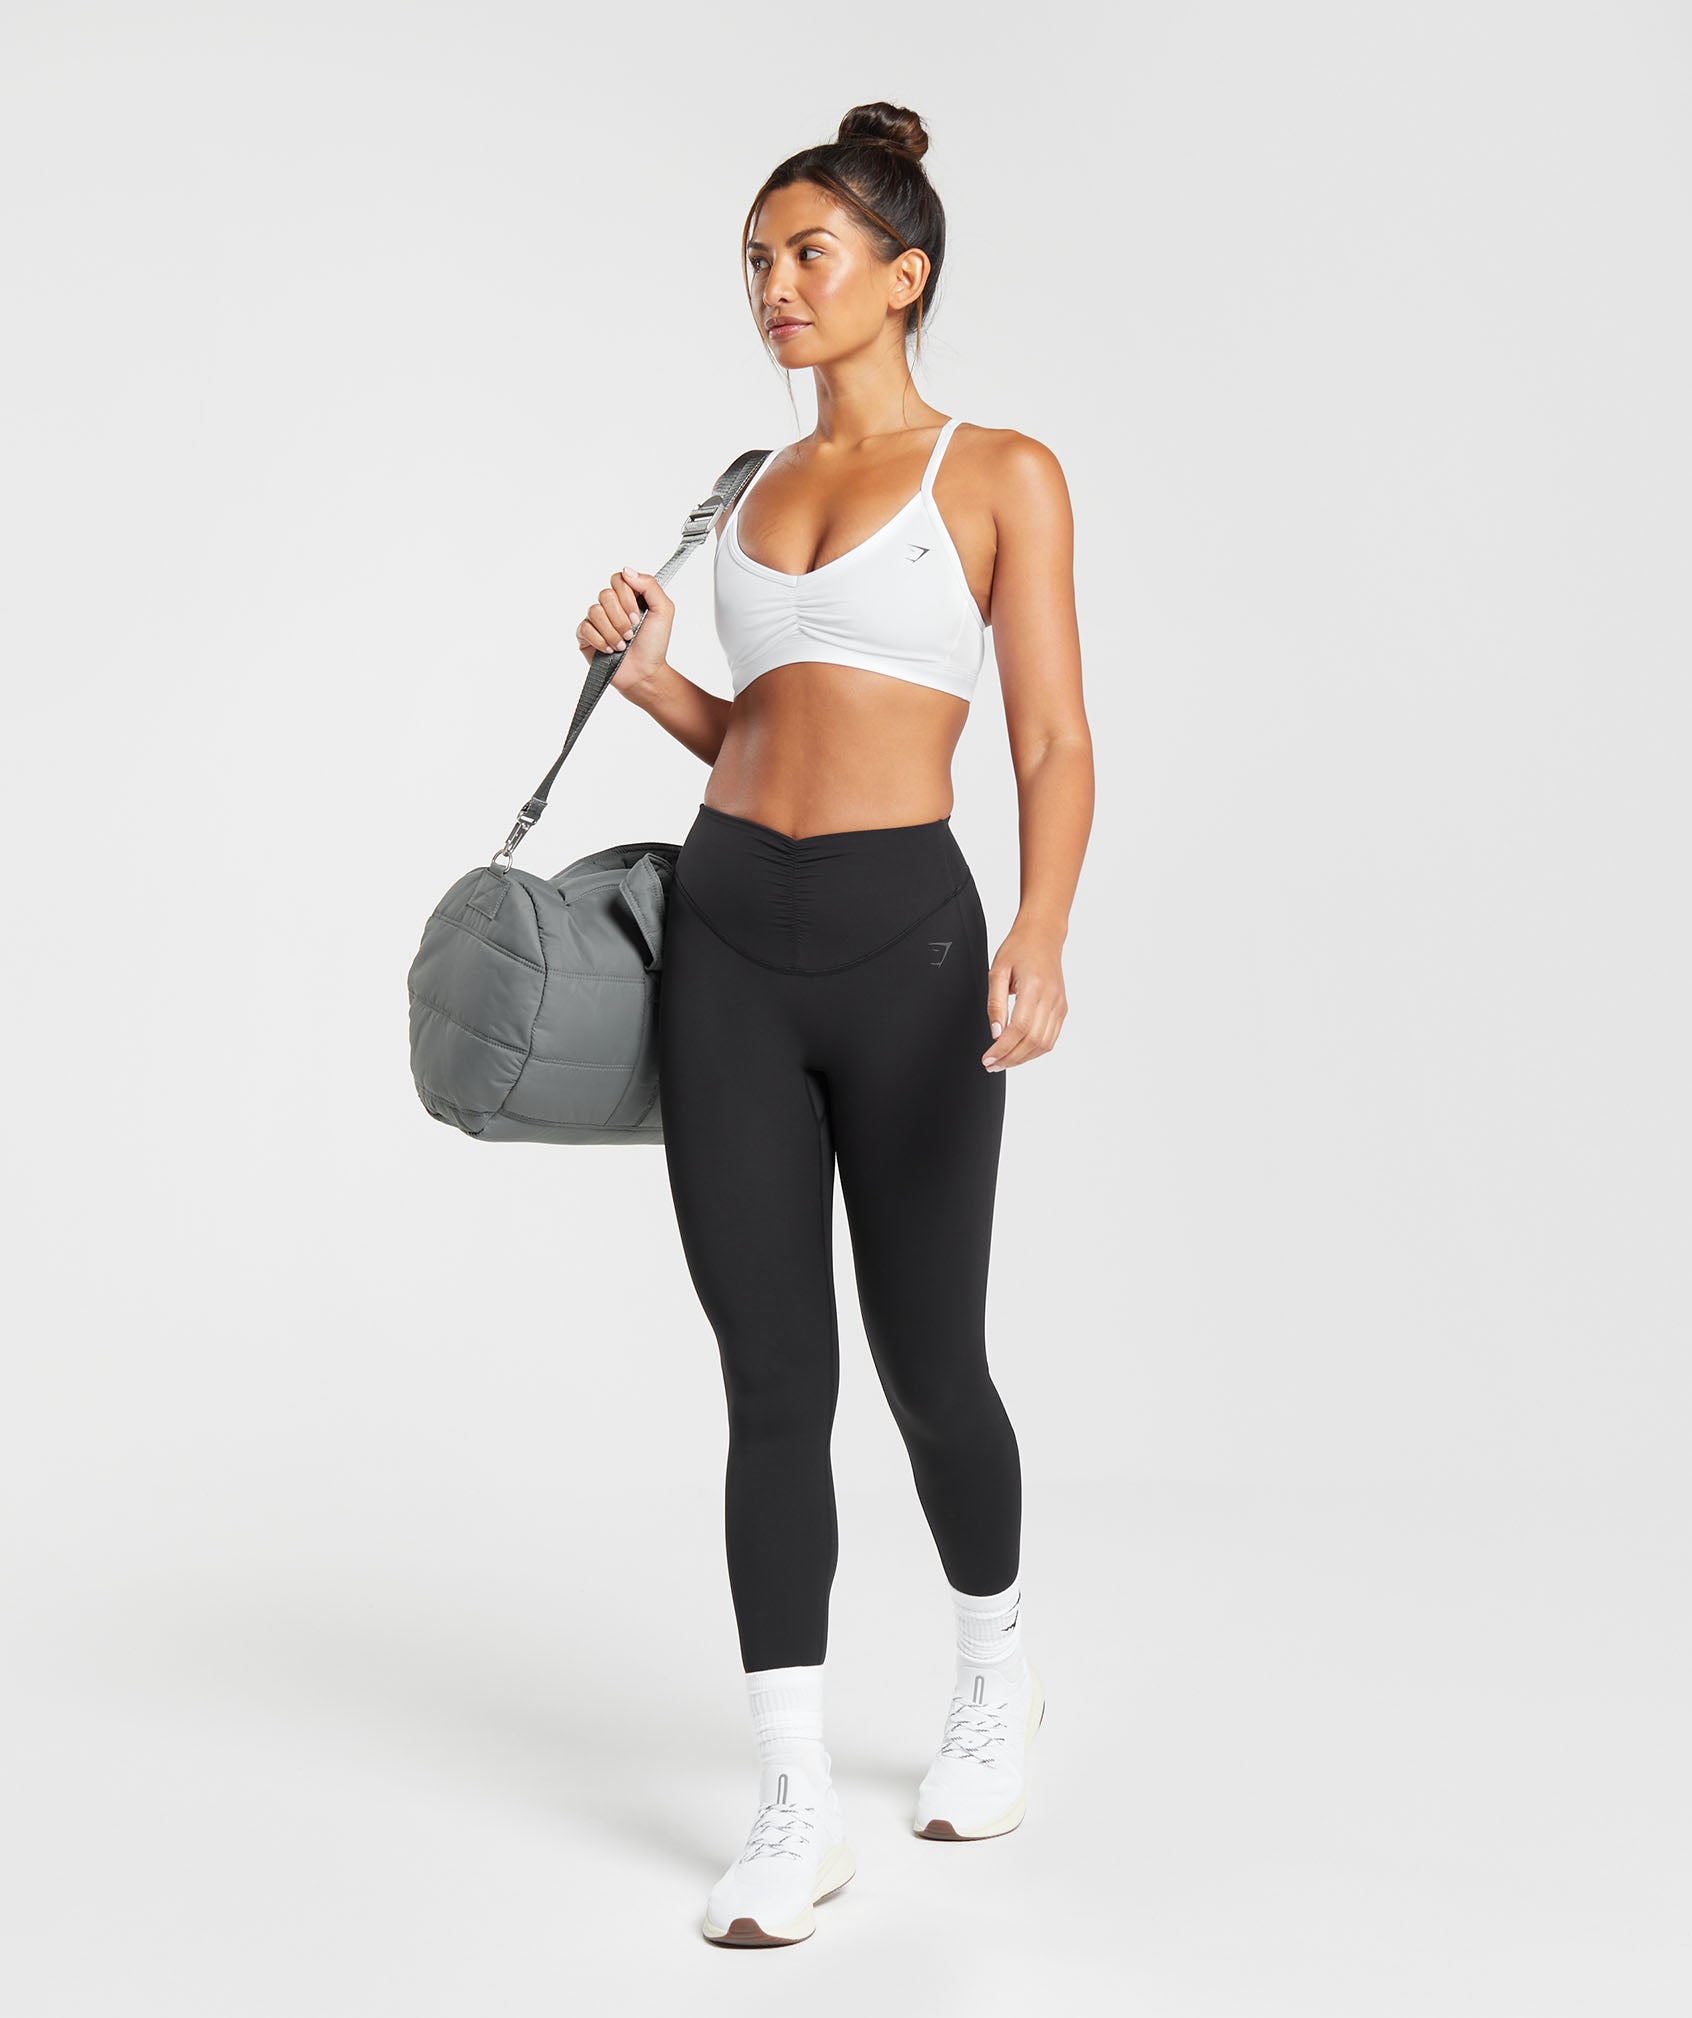 Ruched Strappy Sports Bra in White - view 4